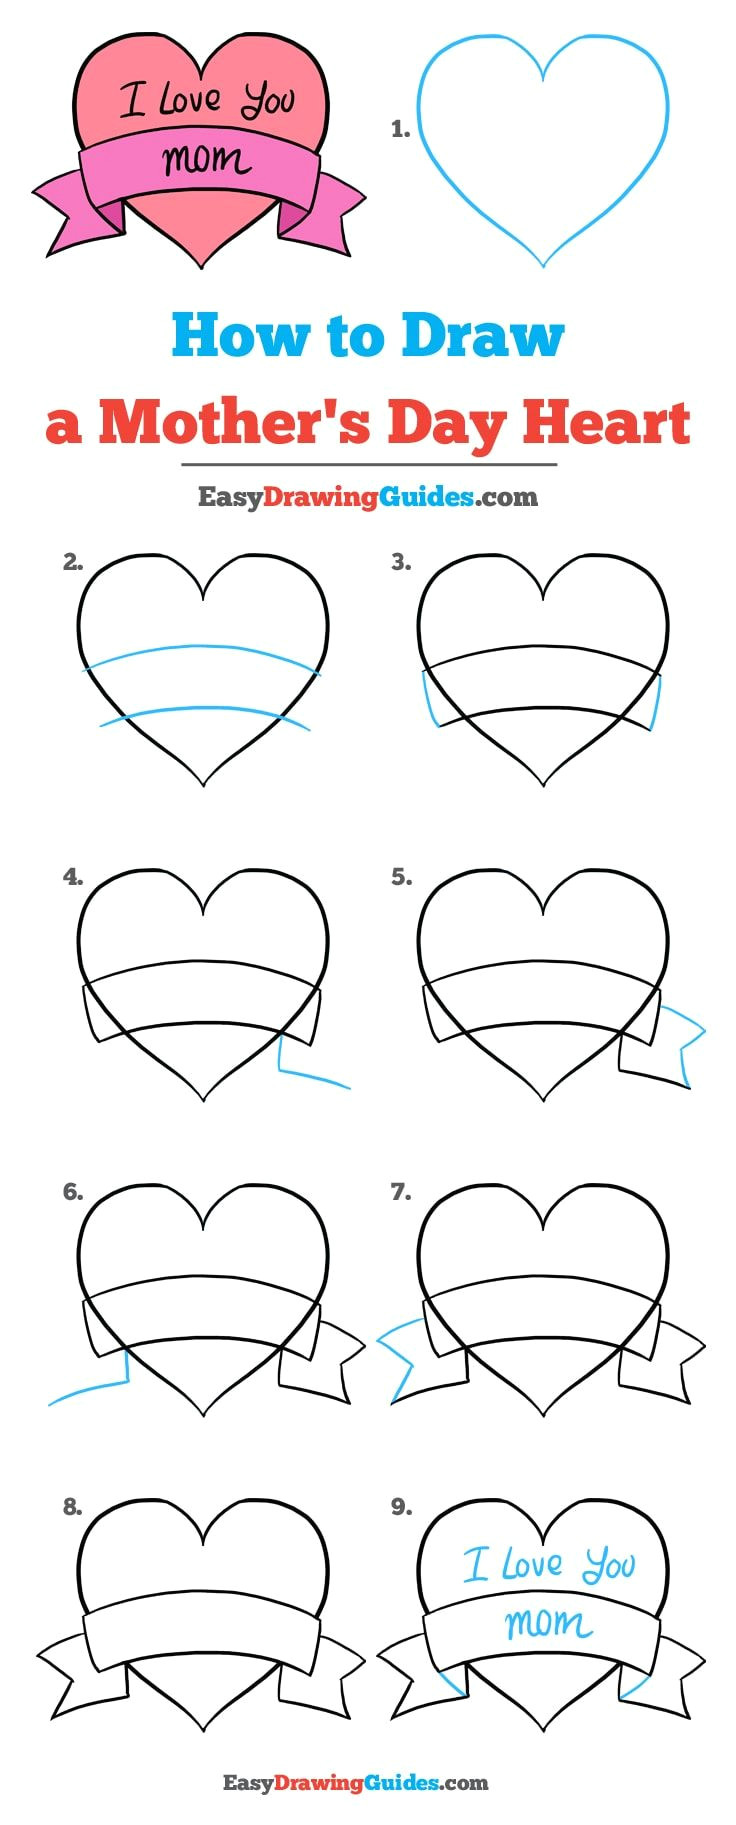 Easy Kindergarten Drawings How to Draw A Mother S Day Heart Really Easy Drawing Tutorial